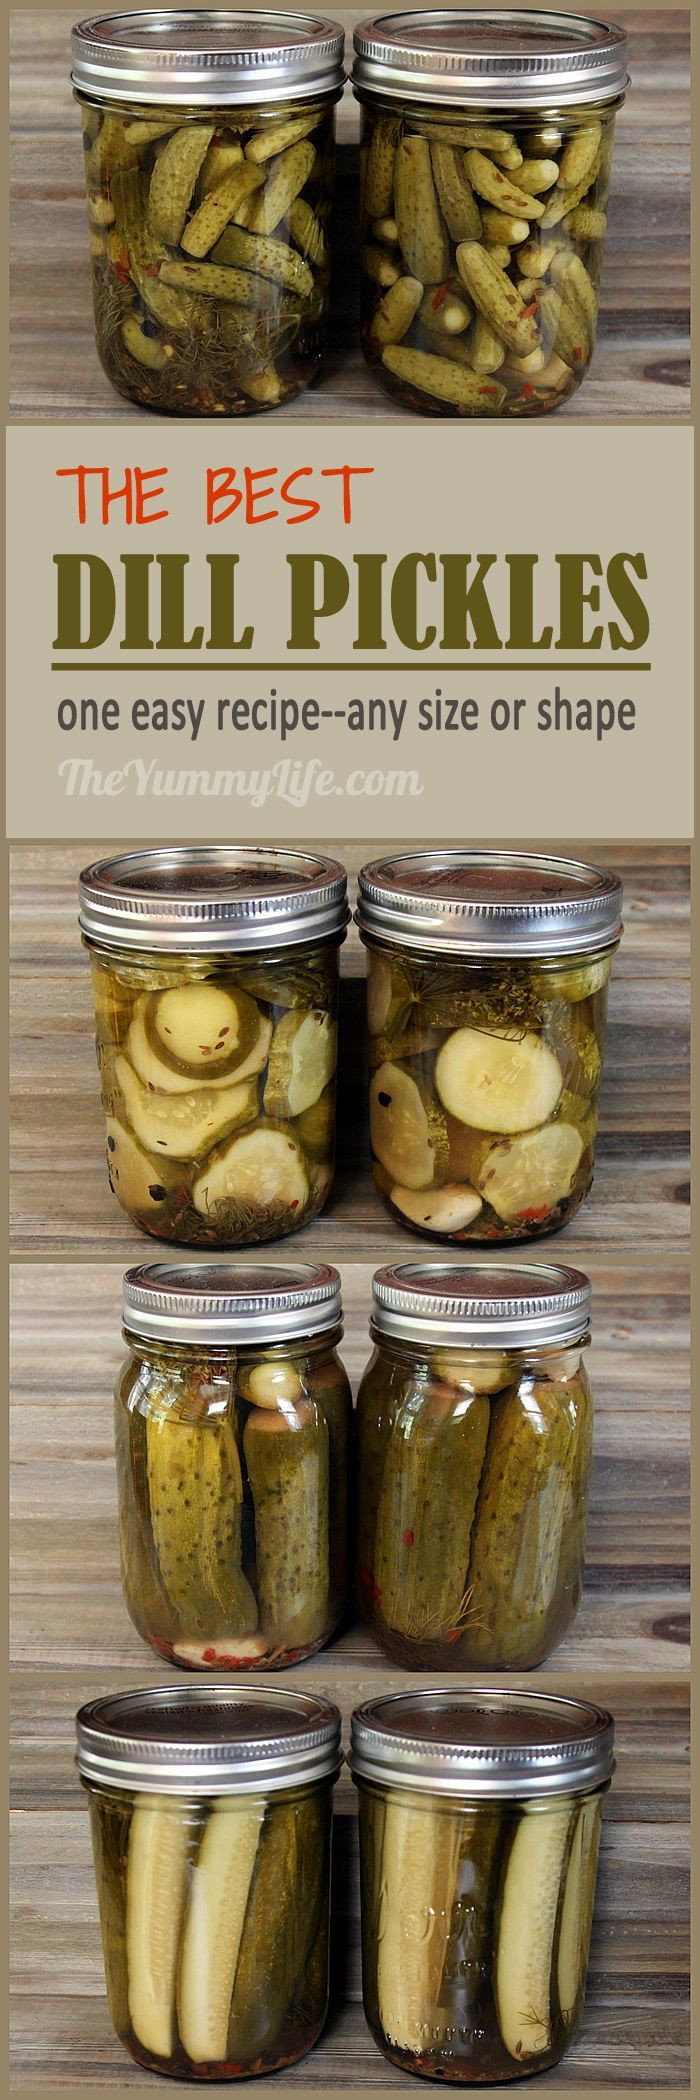 Dill Pickles Recipe For Canning
 Dill Pickles Recipe